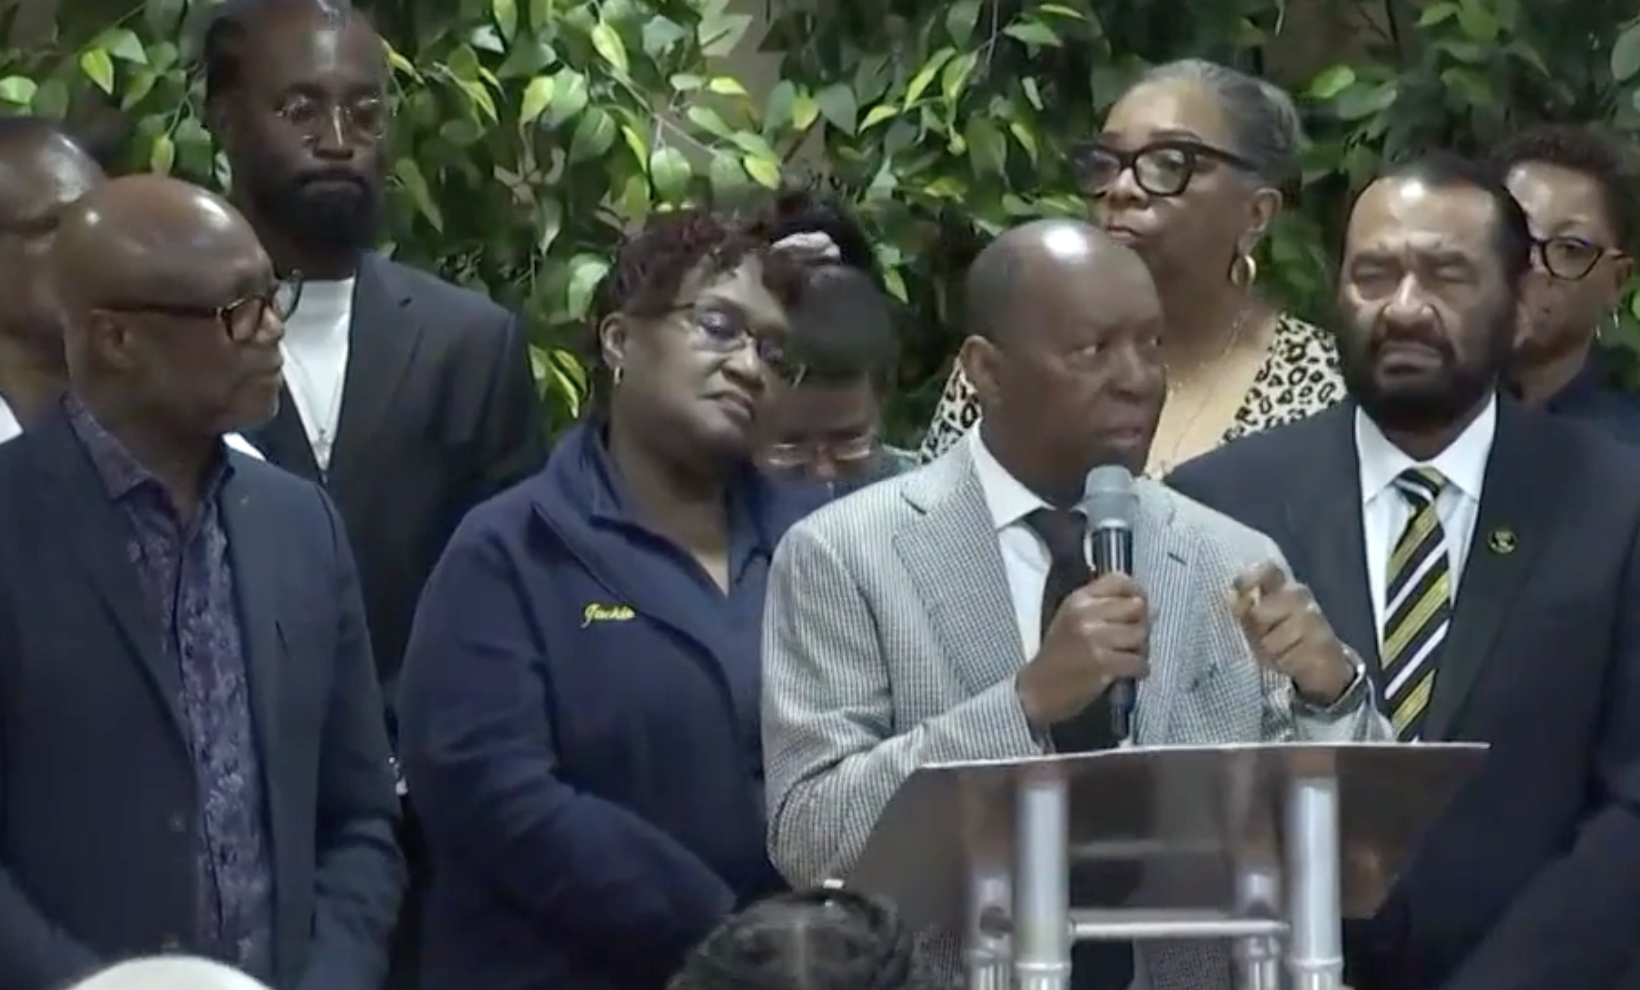 Houston NAACP requests meeting with Abbott, TEA commissioner over HISD takeover